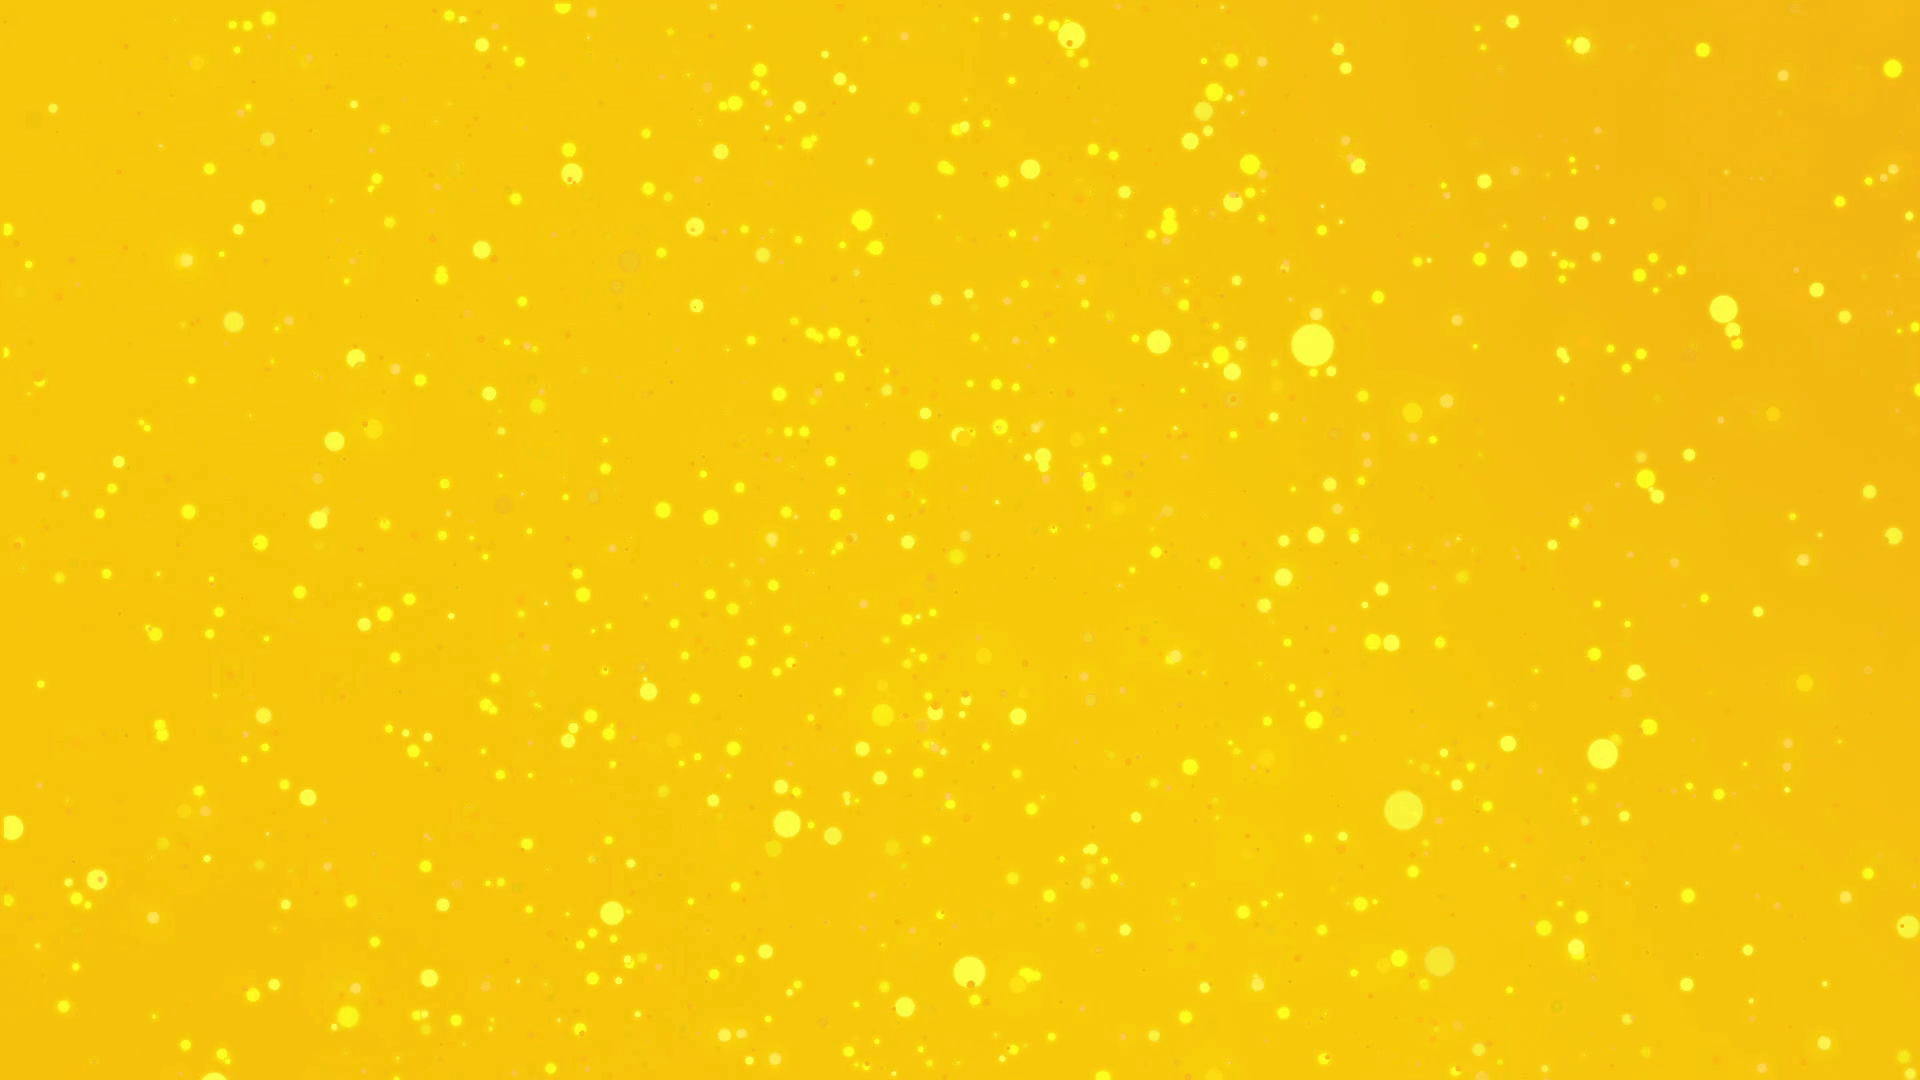 Beautiful festive golden yellow glitter background with flickering